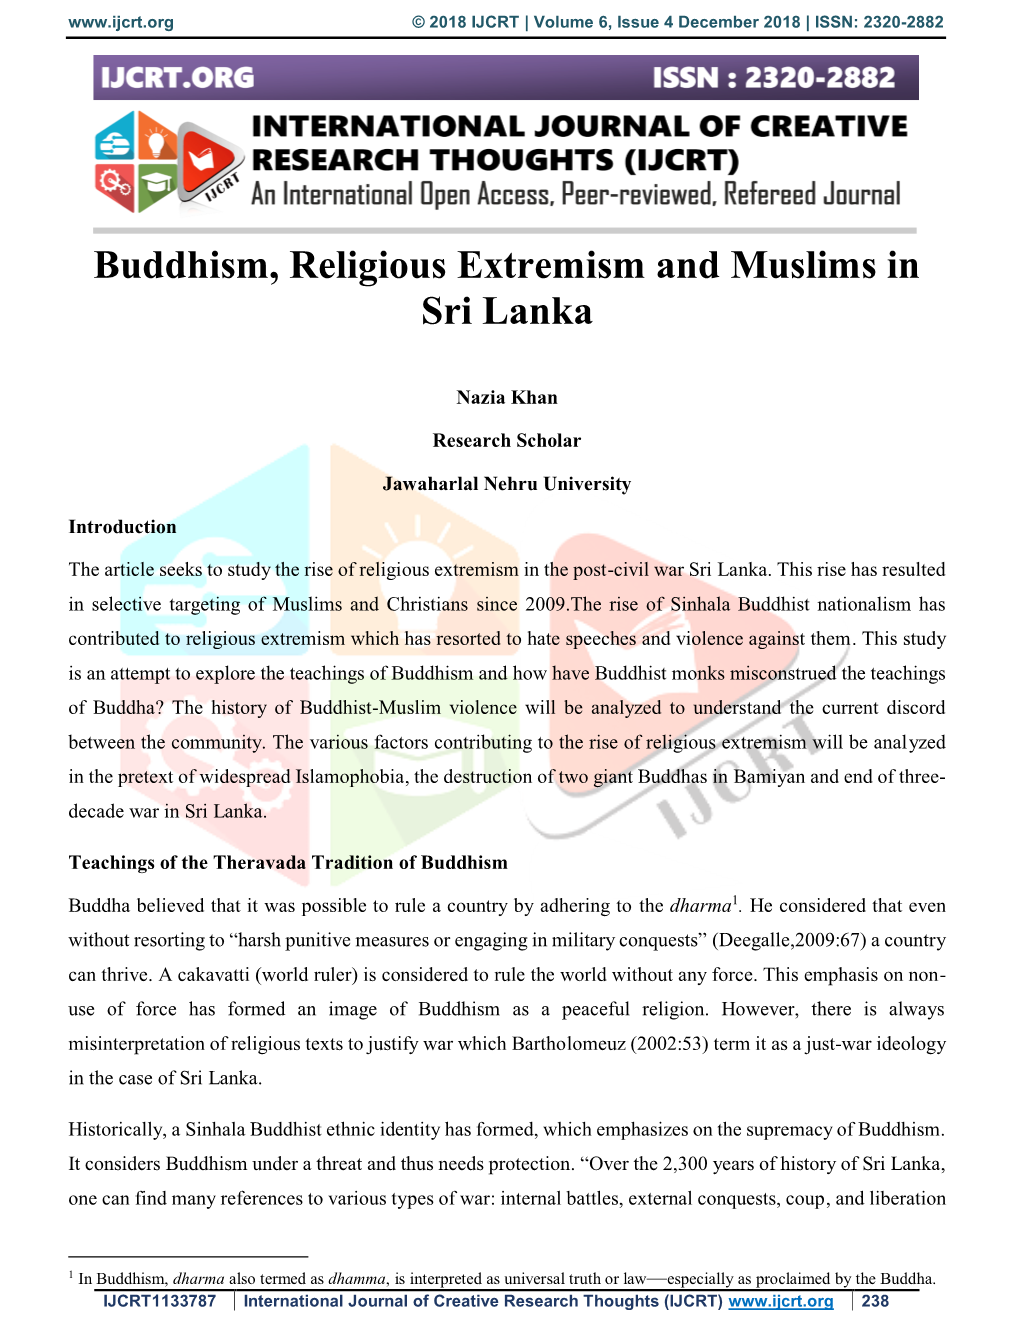 Buddhism, Religious Extremism and Muslims in Sri Lanka